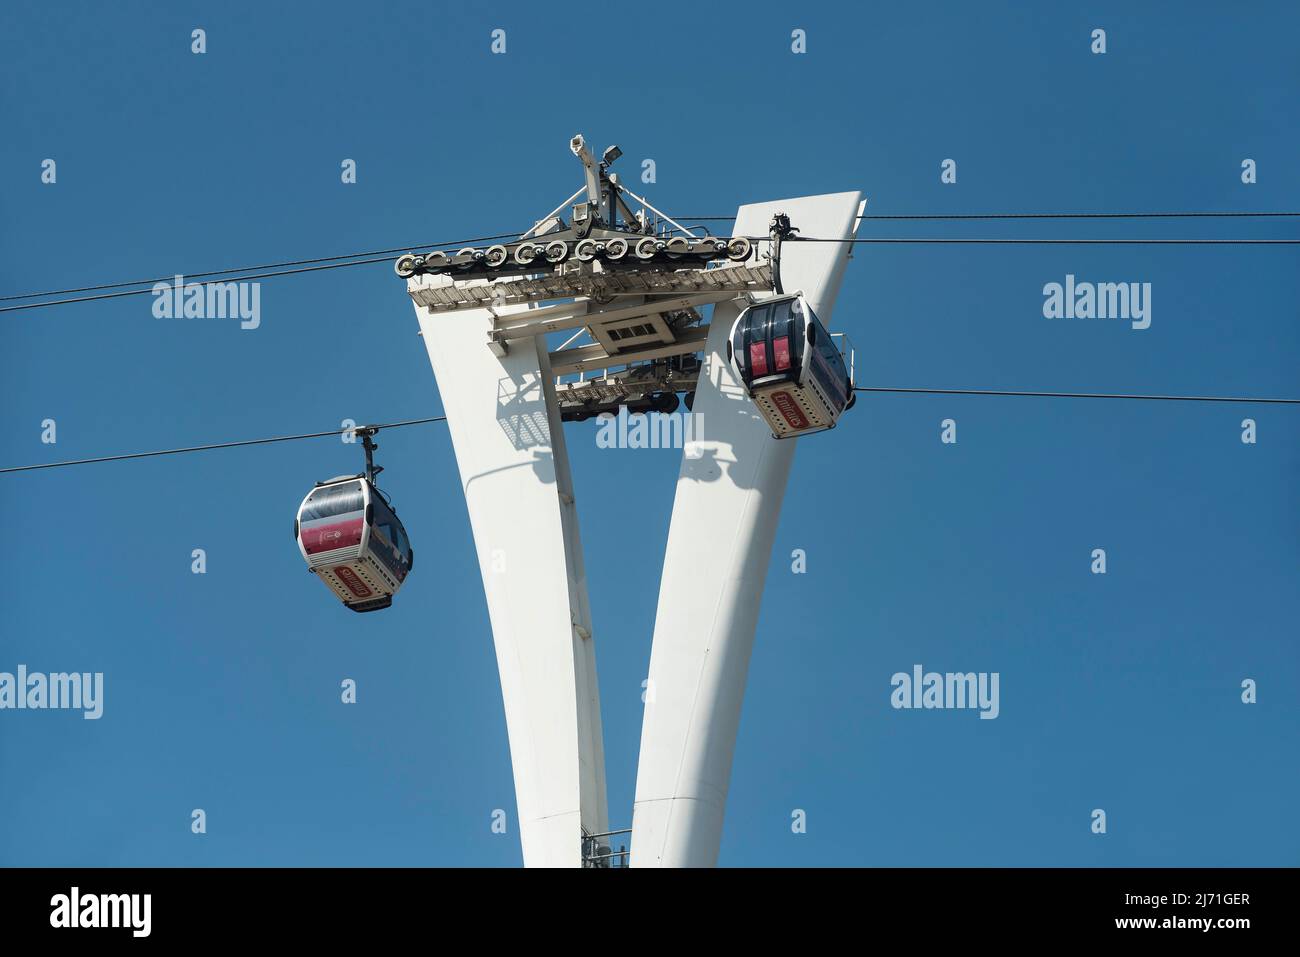 The Emirates cable car over The Thames between The Royal Docks and The Greenwich Peninsula, London. Stock Photo